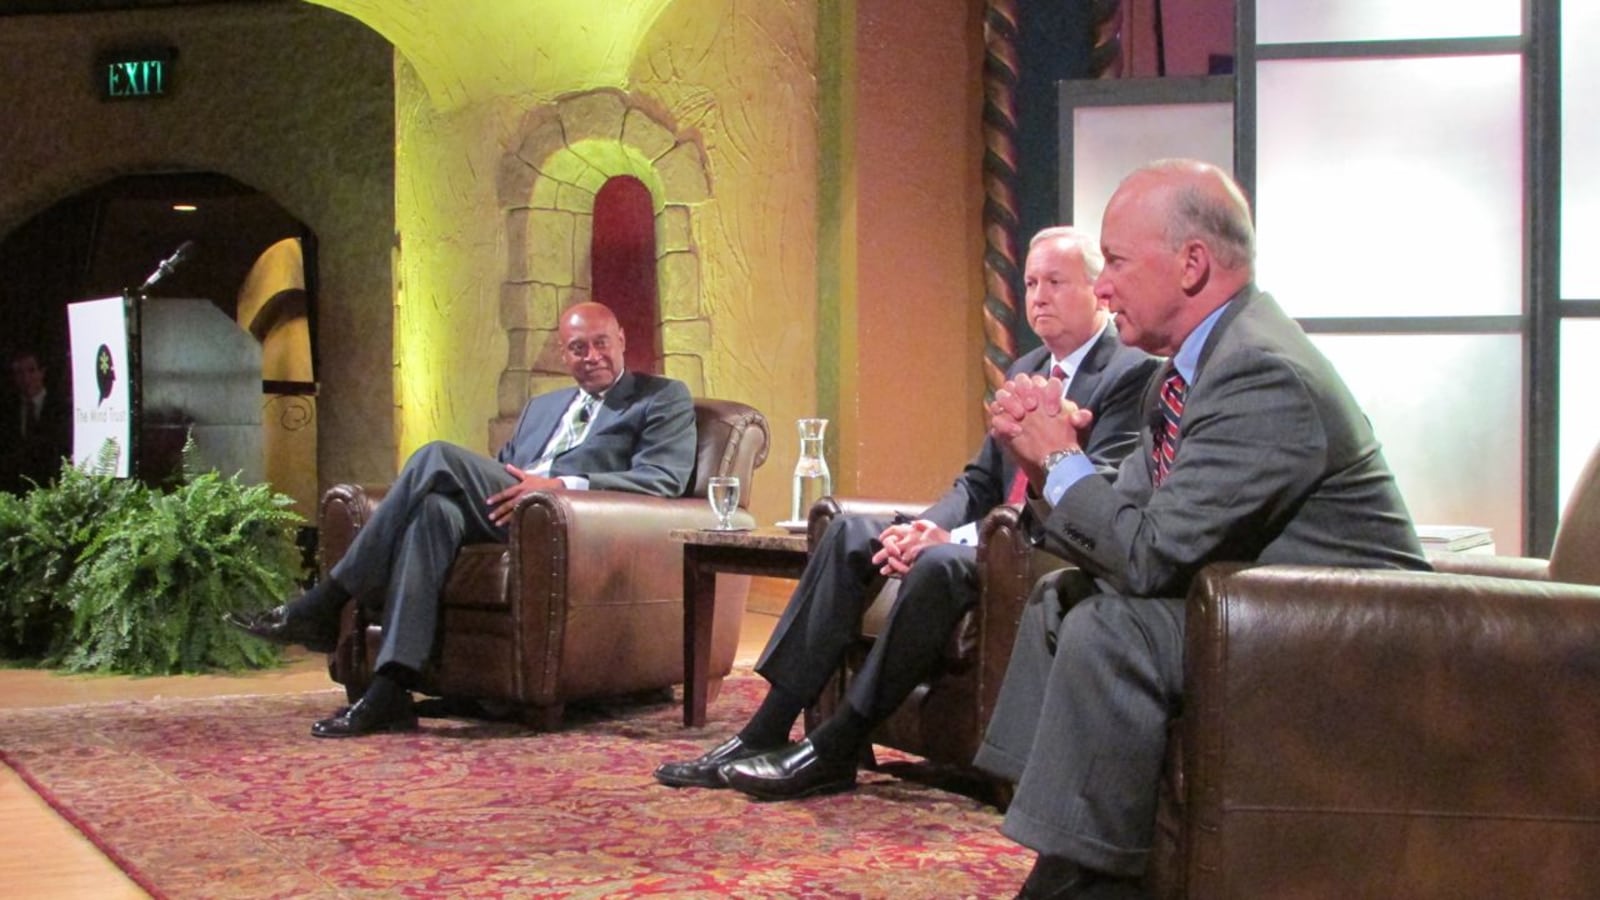 Kevin Chavous (left) leads a panel discussion with former Indianapolis Mayor Bart Peterson (center) and former Gov. Mitch Daniels.